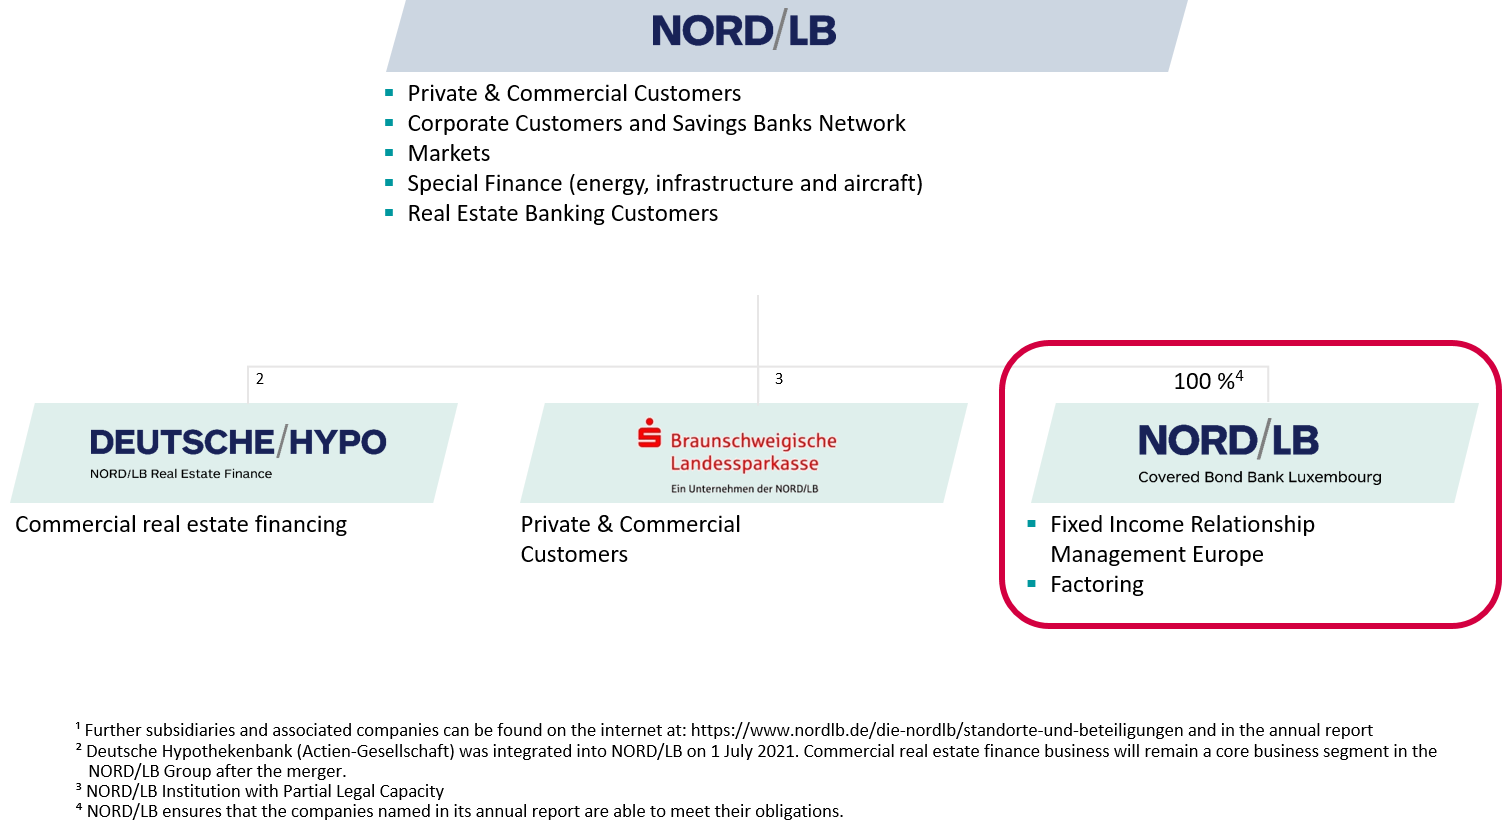 Subsidiaries and holdings of NORD/LB